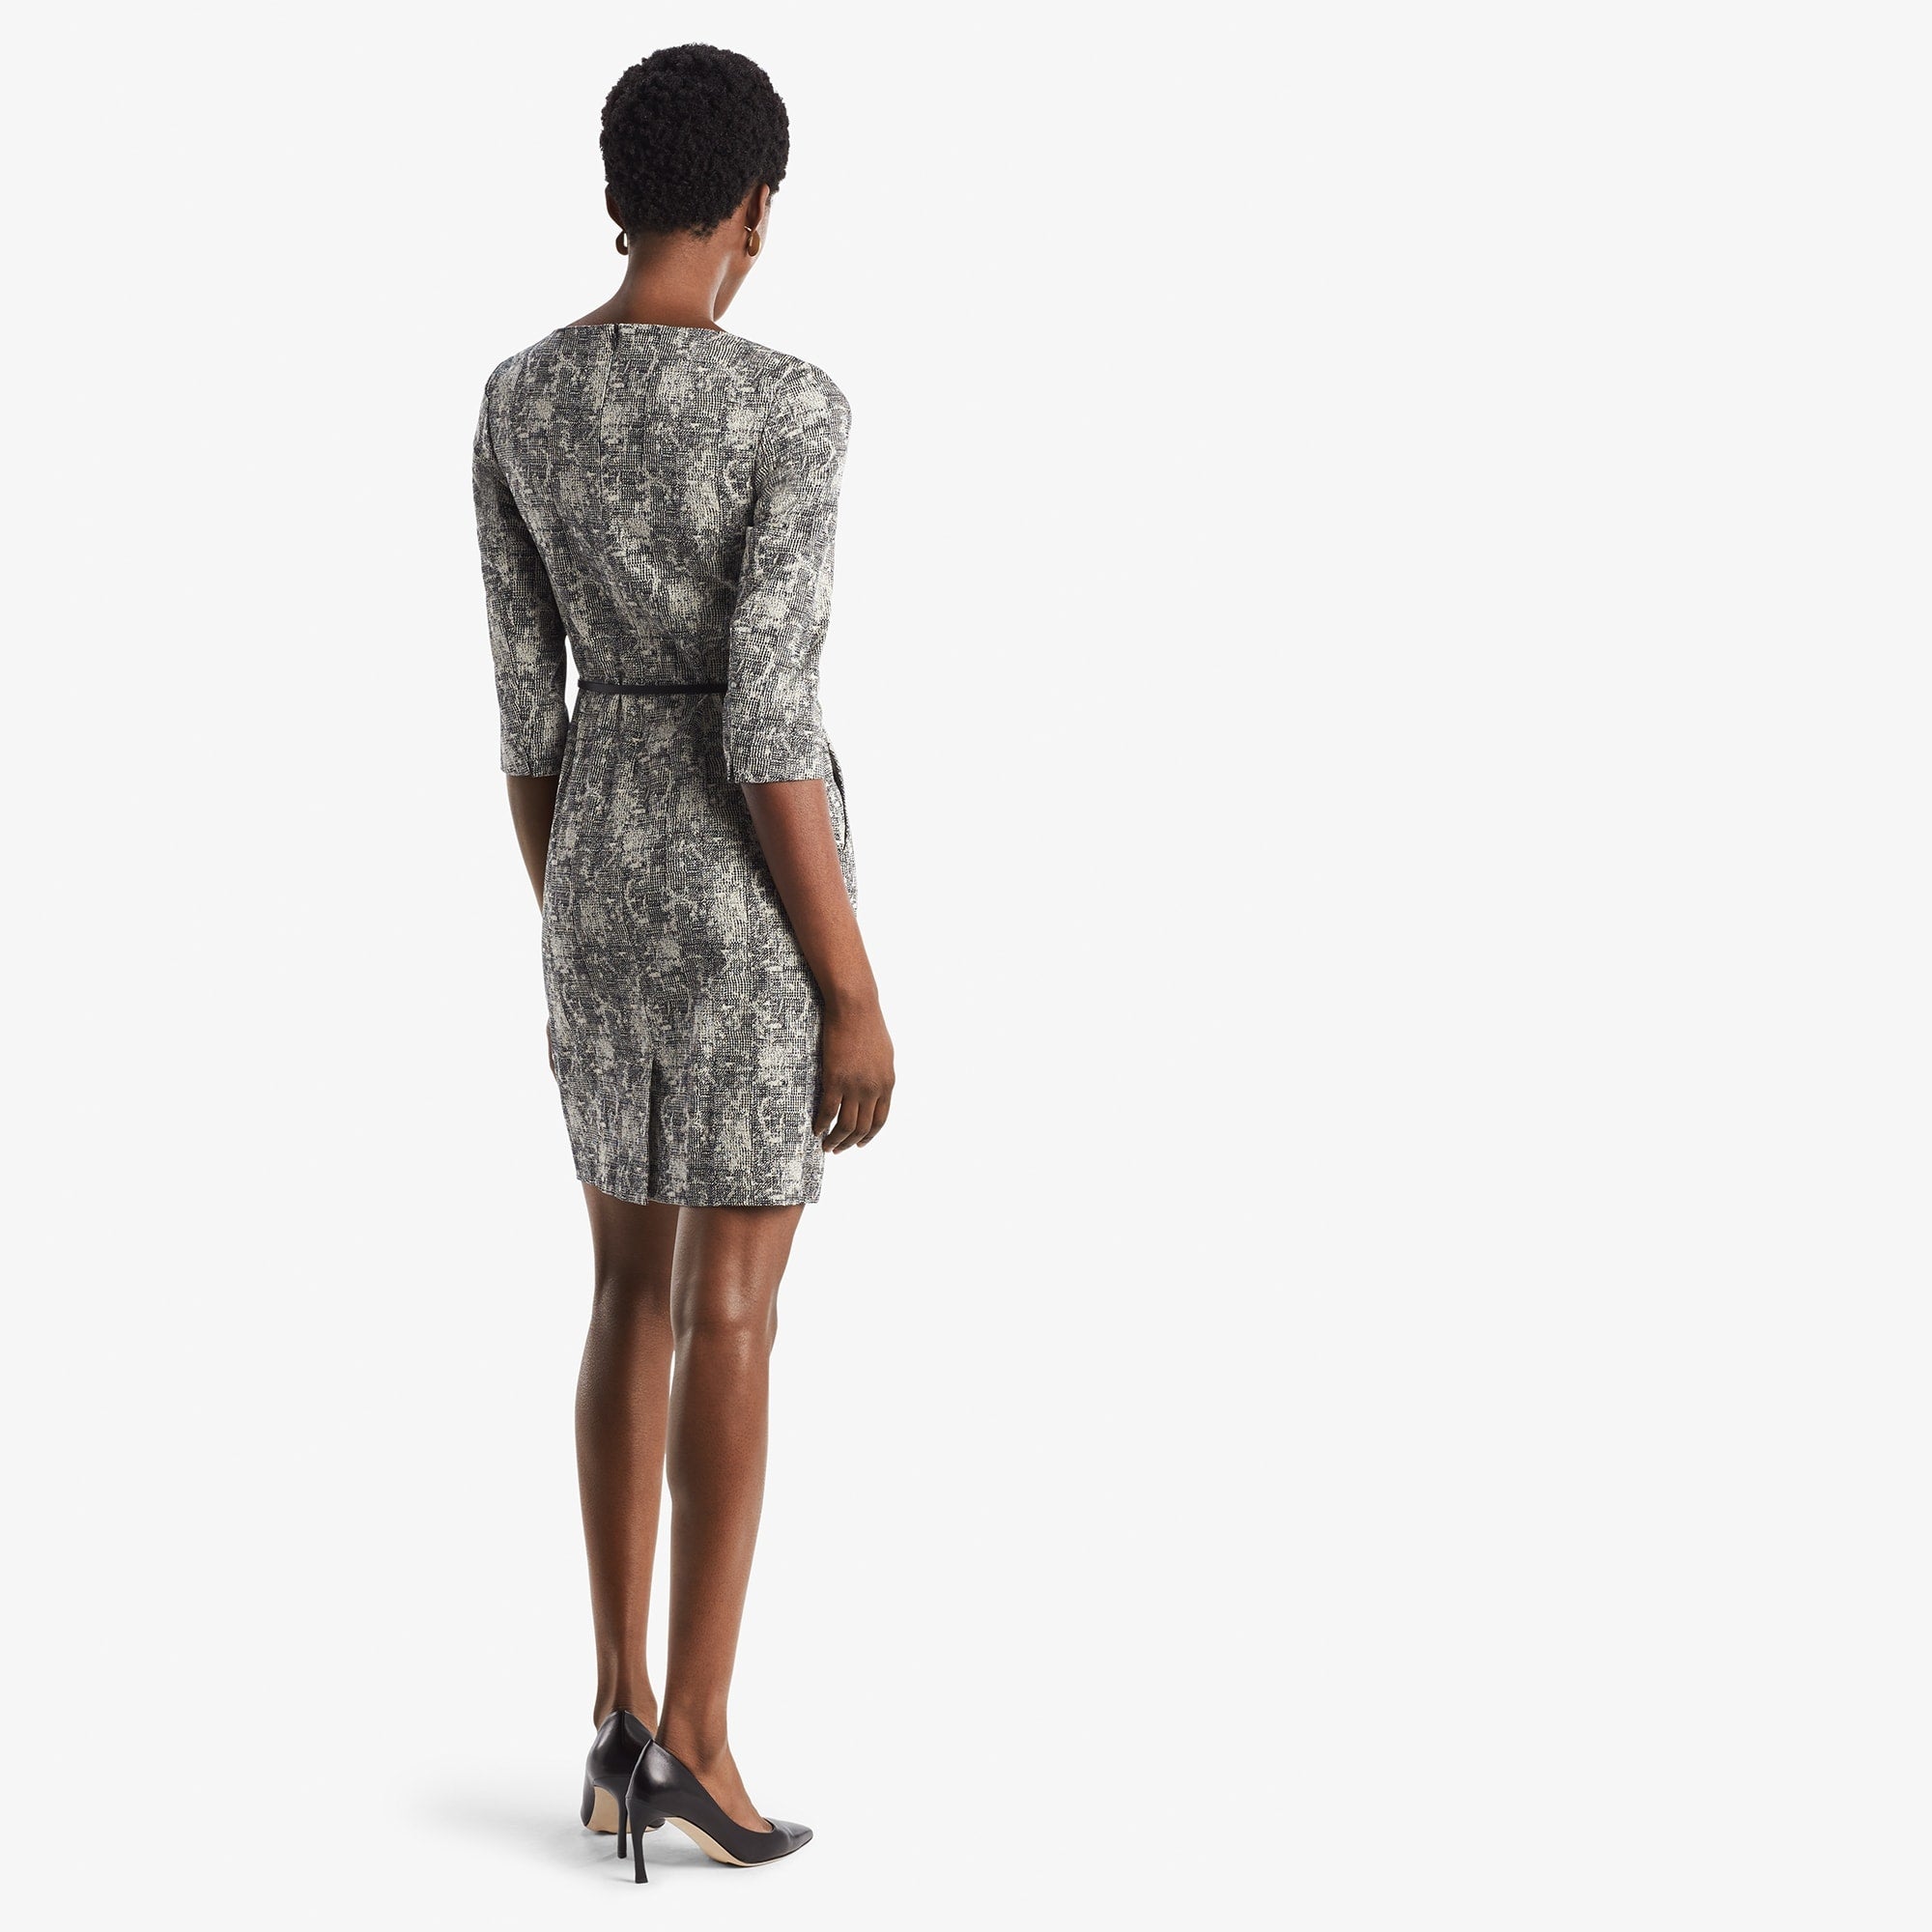 Back image of a woman standing wearing the Etsuko dress in crackle